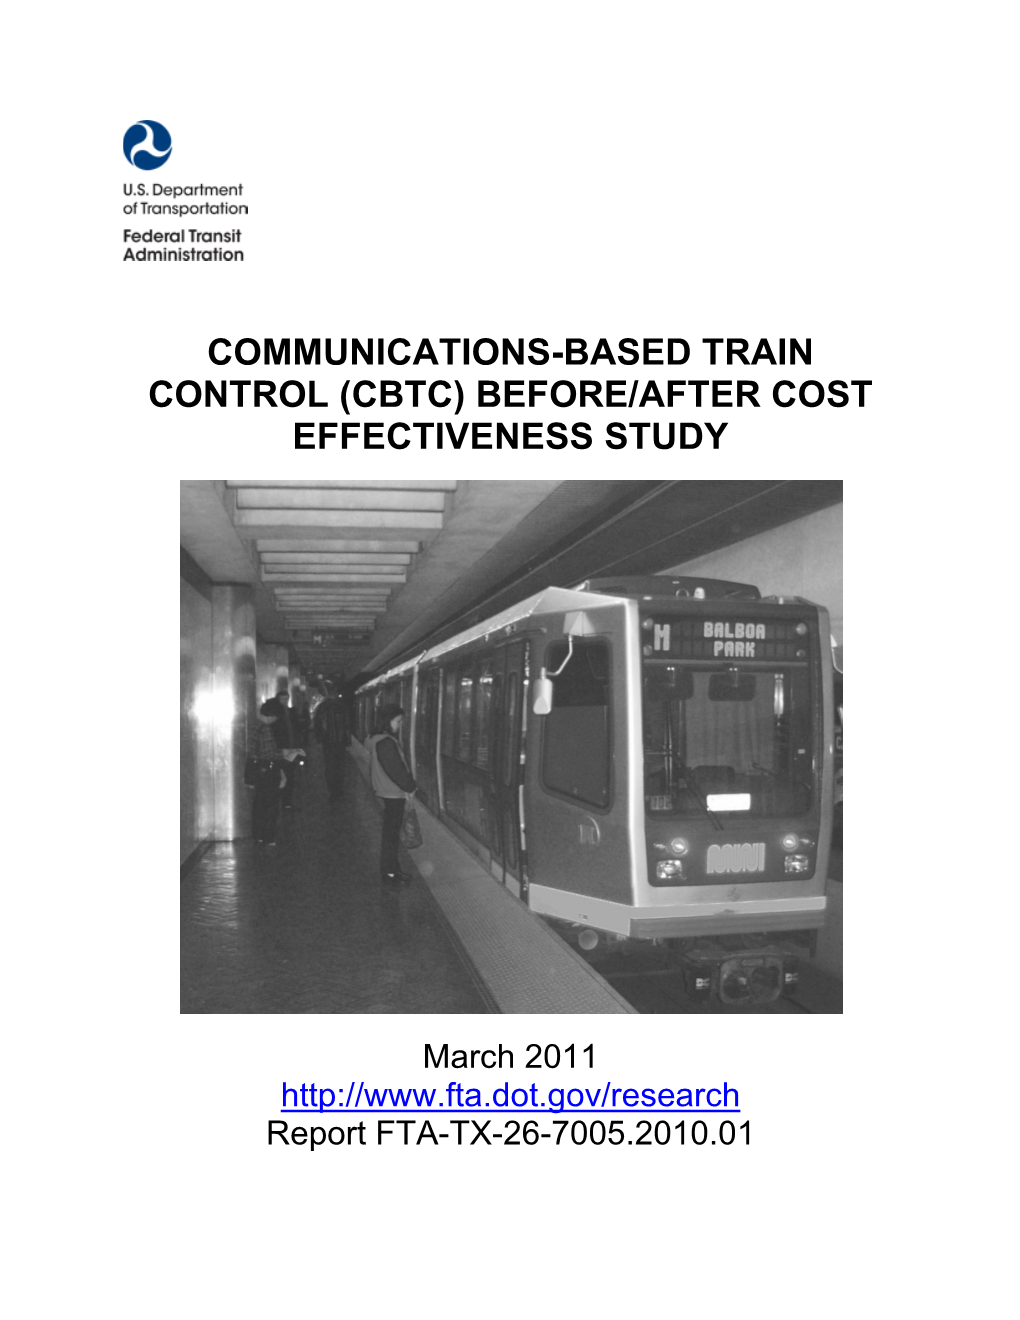 Communications-Based Train Control (Cbtc) Before/After Cost Effectiveness Study